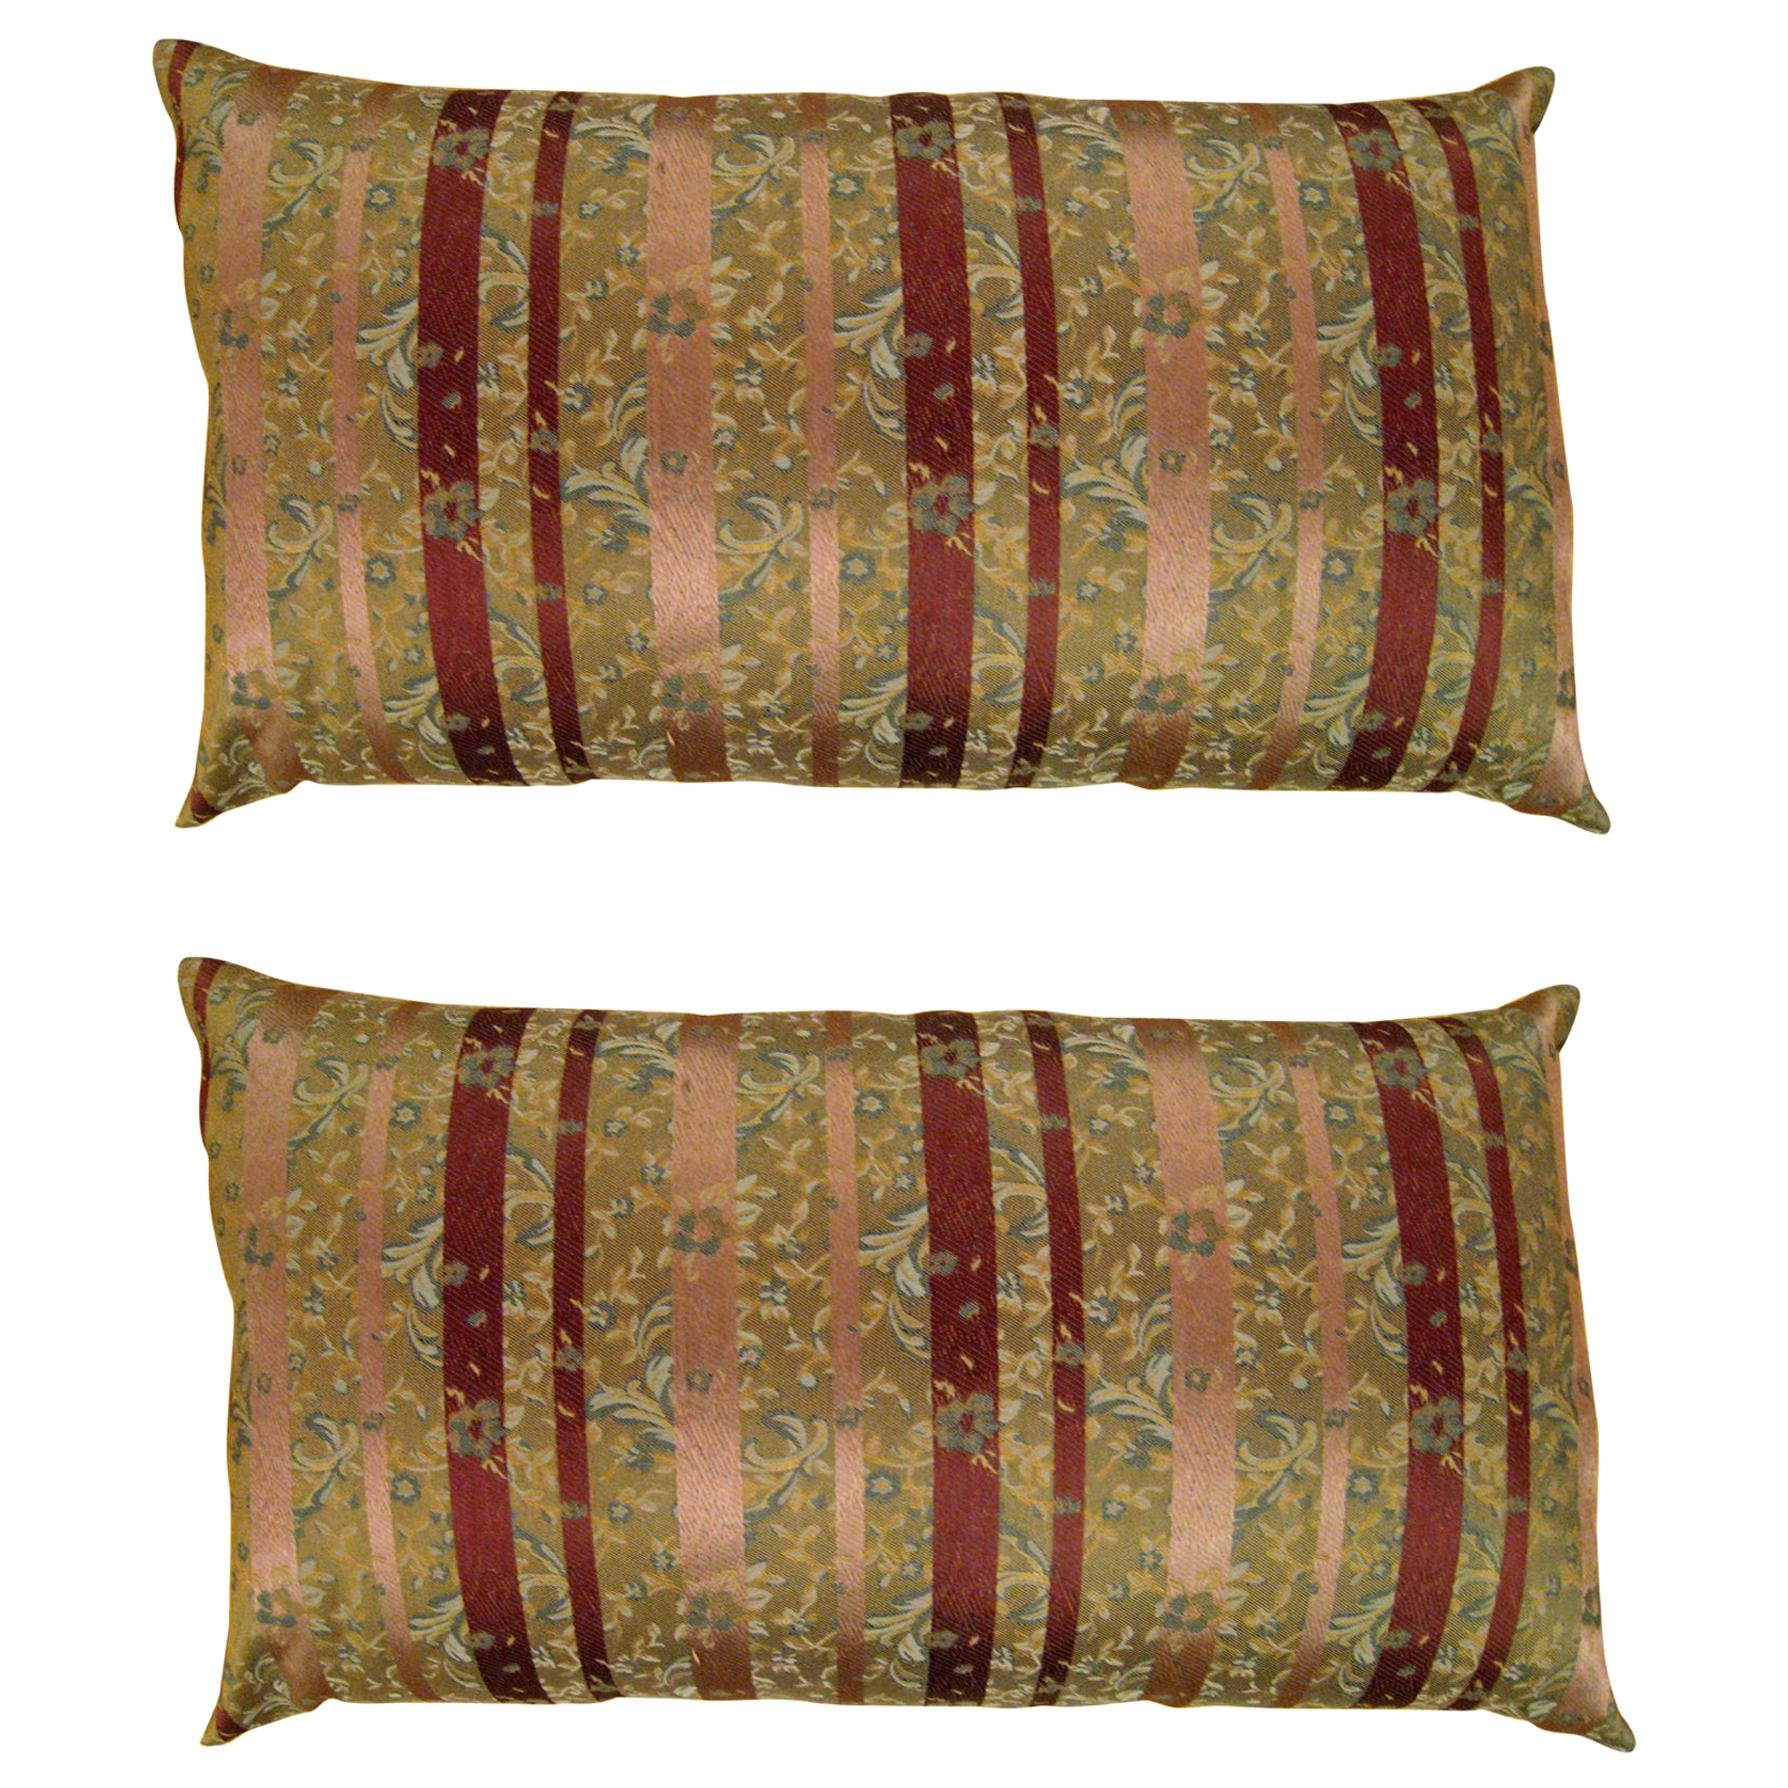 Pair of Large Decorative Satin Pillows w/ Vintage Striped Brocade on Both Sides